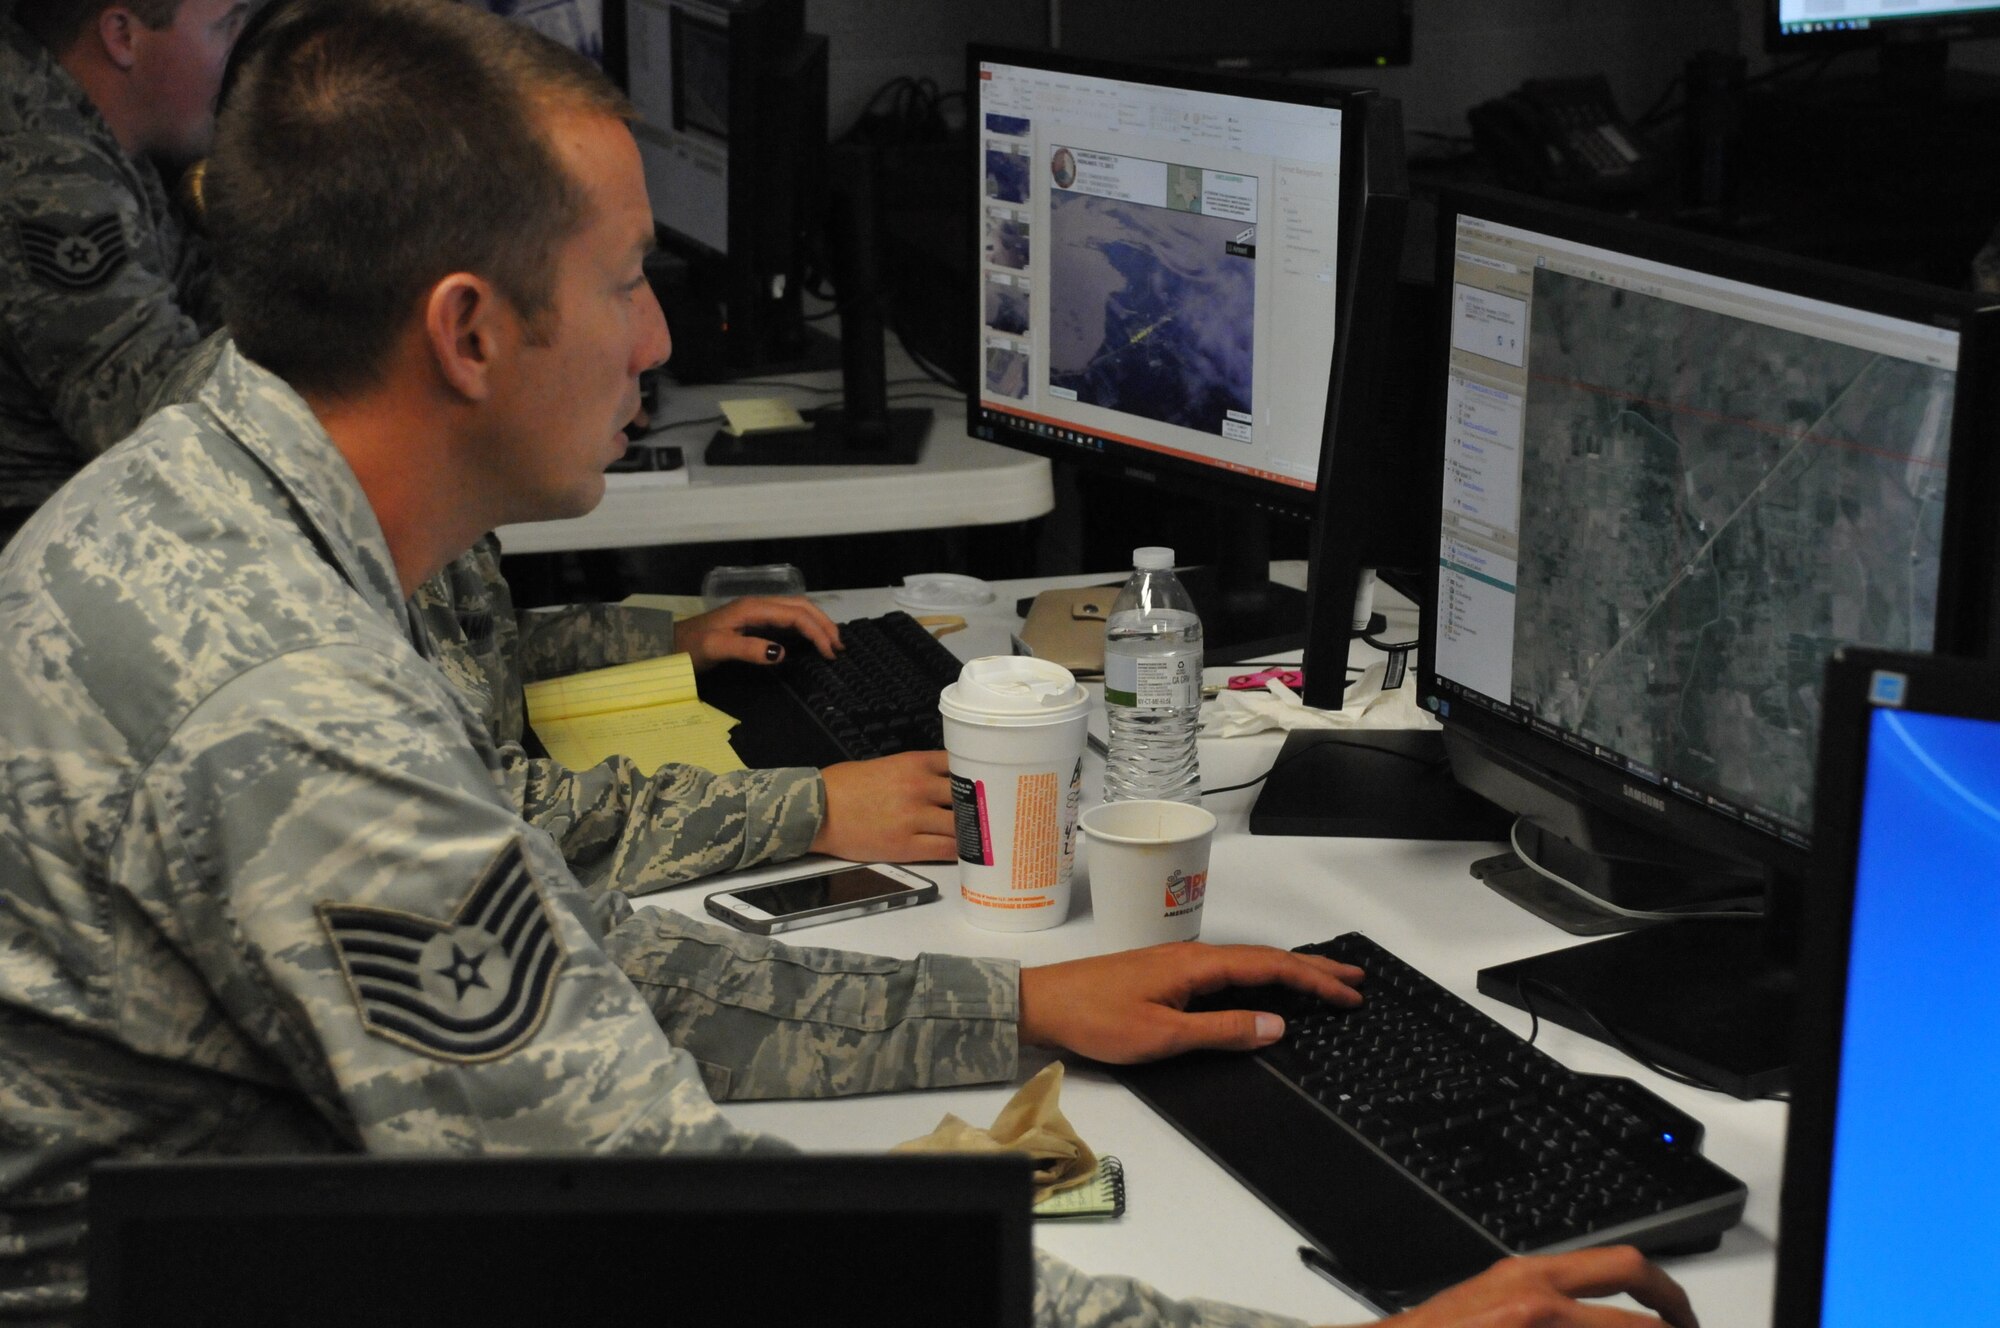 Airmen of the 102d Intelligence Surveillance Reconnaissance Group at Otis Air National Guard Base, Massachusetts provide imagery analysis support for Hurricane Harvey first responders.  When tasked for domestic operations, Air National Guard intelligence analysts utilize different equipment and networks, but apply the same analytical tradecraft and problem solving skills that they use in their federal mission overseas.